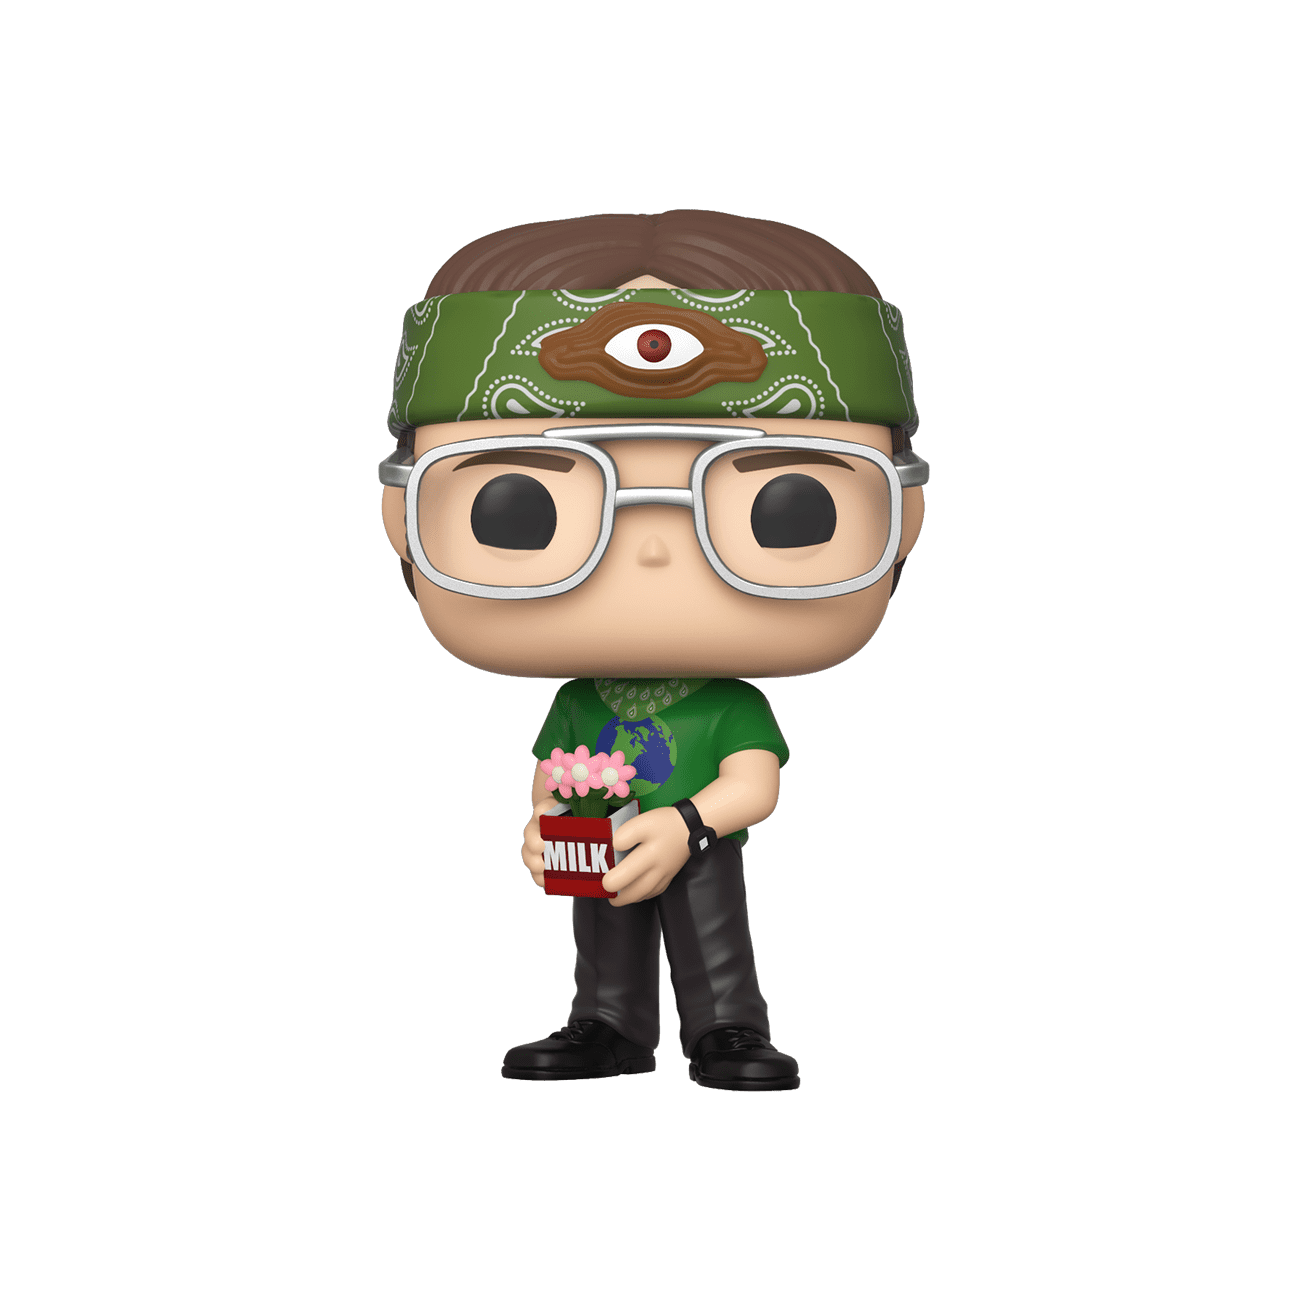 NYCC 2020 *SHARED* Funko Pop The Office DWIGHT SCHRUTE as Recyclops #1041